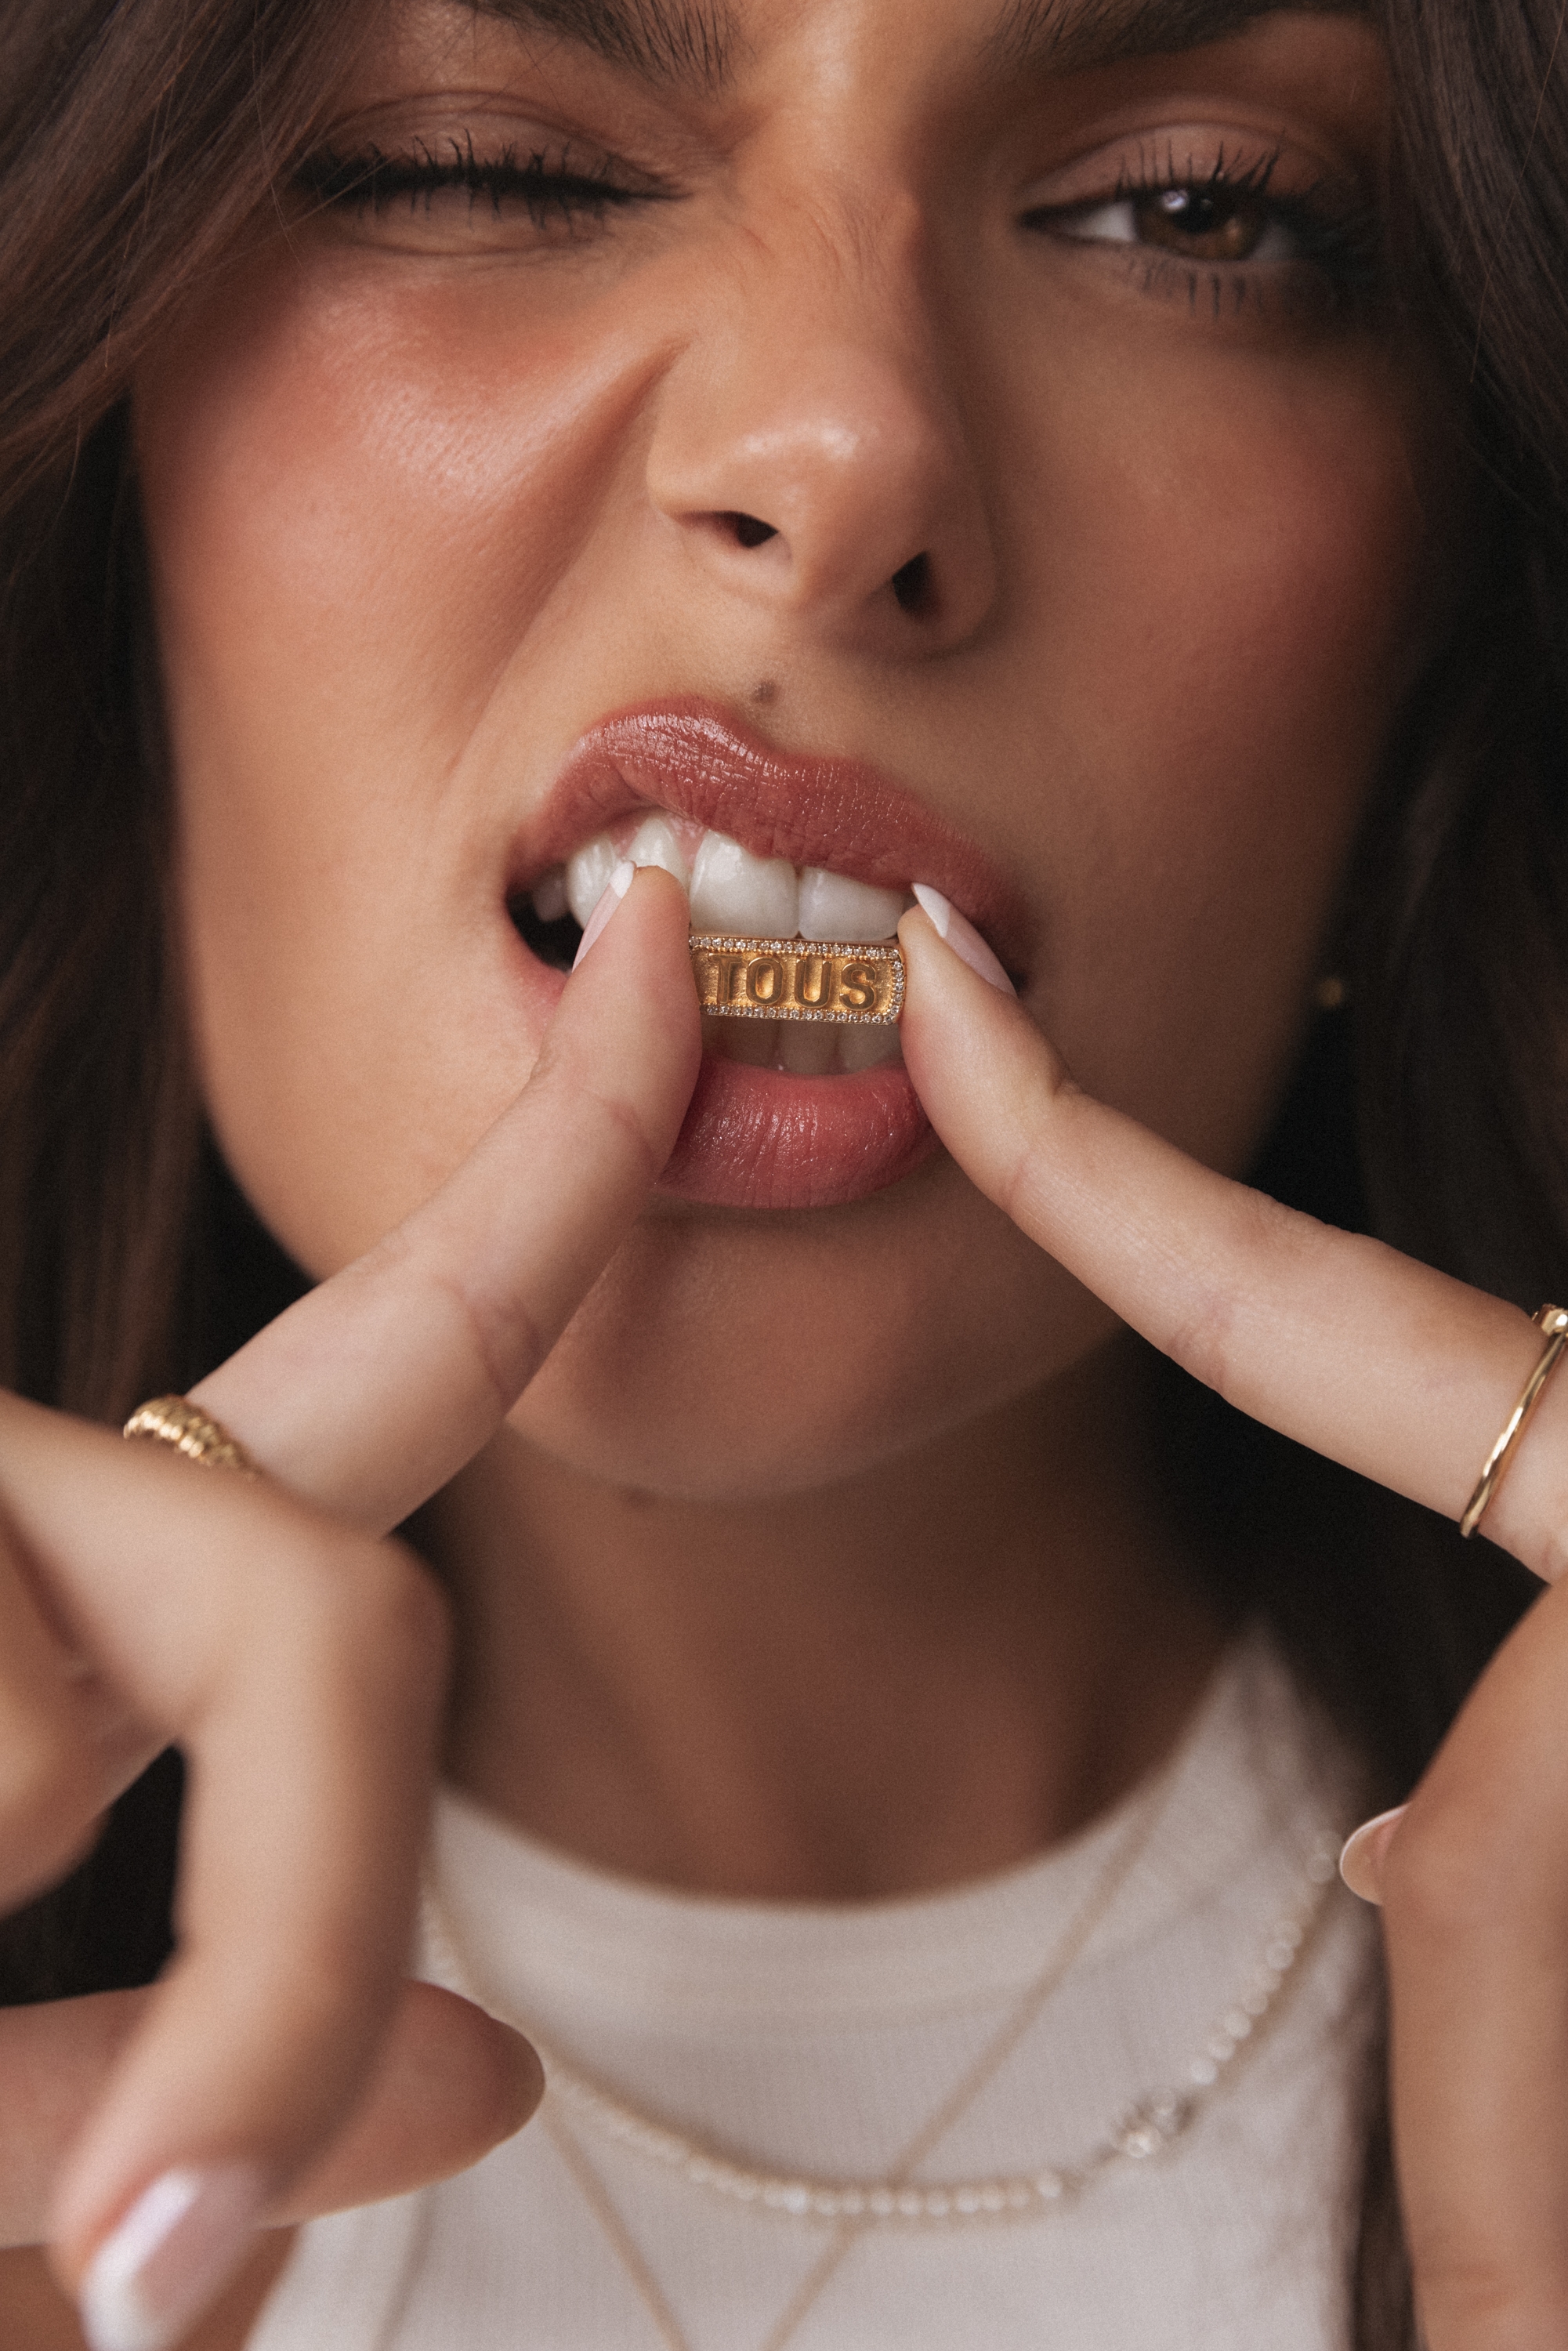 A woman is wearing a gold necklace and sticking out her tongue, she has a gold ring in her mouth, and it appears as if she is trying to eat the ring
with her tongue